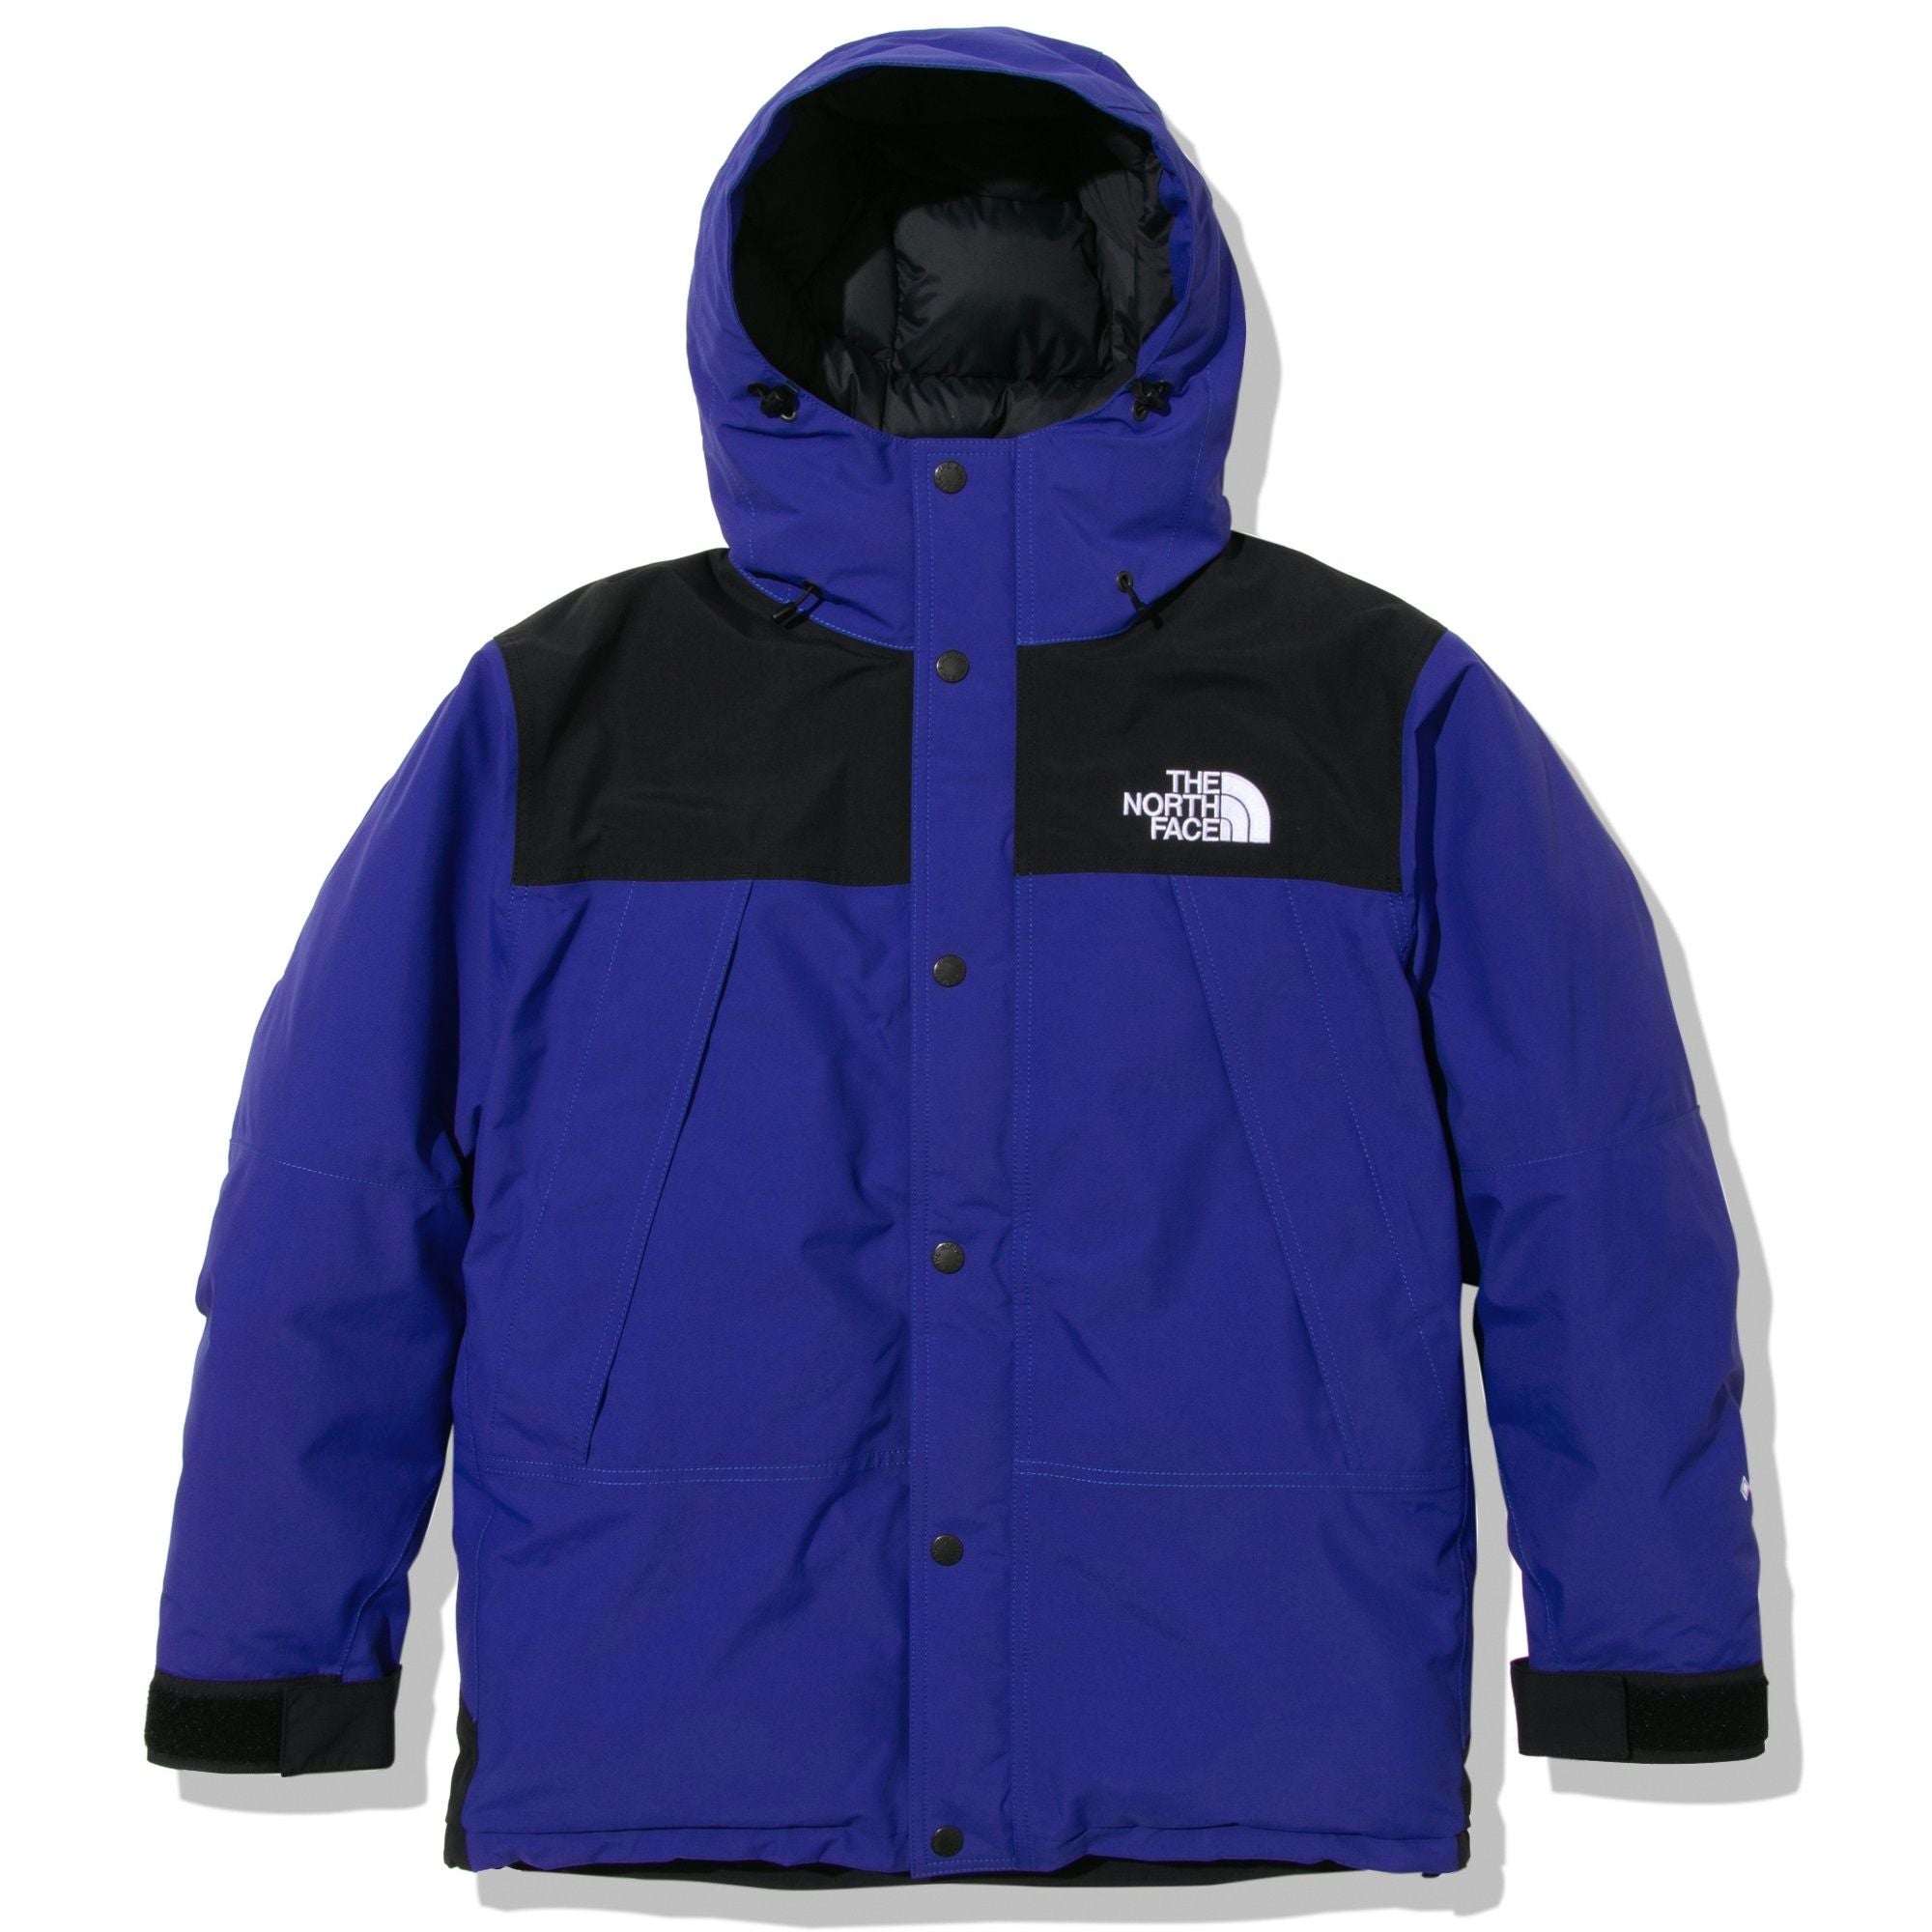 THE NORTH FACE / Mountain Down Jacket ND92237